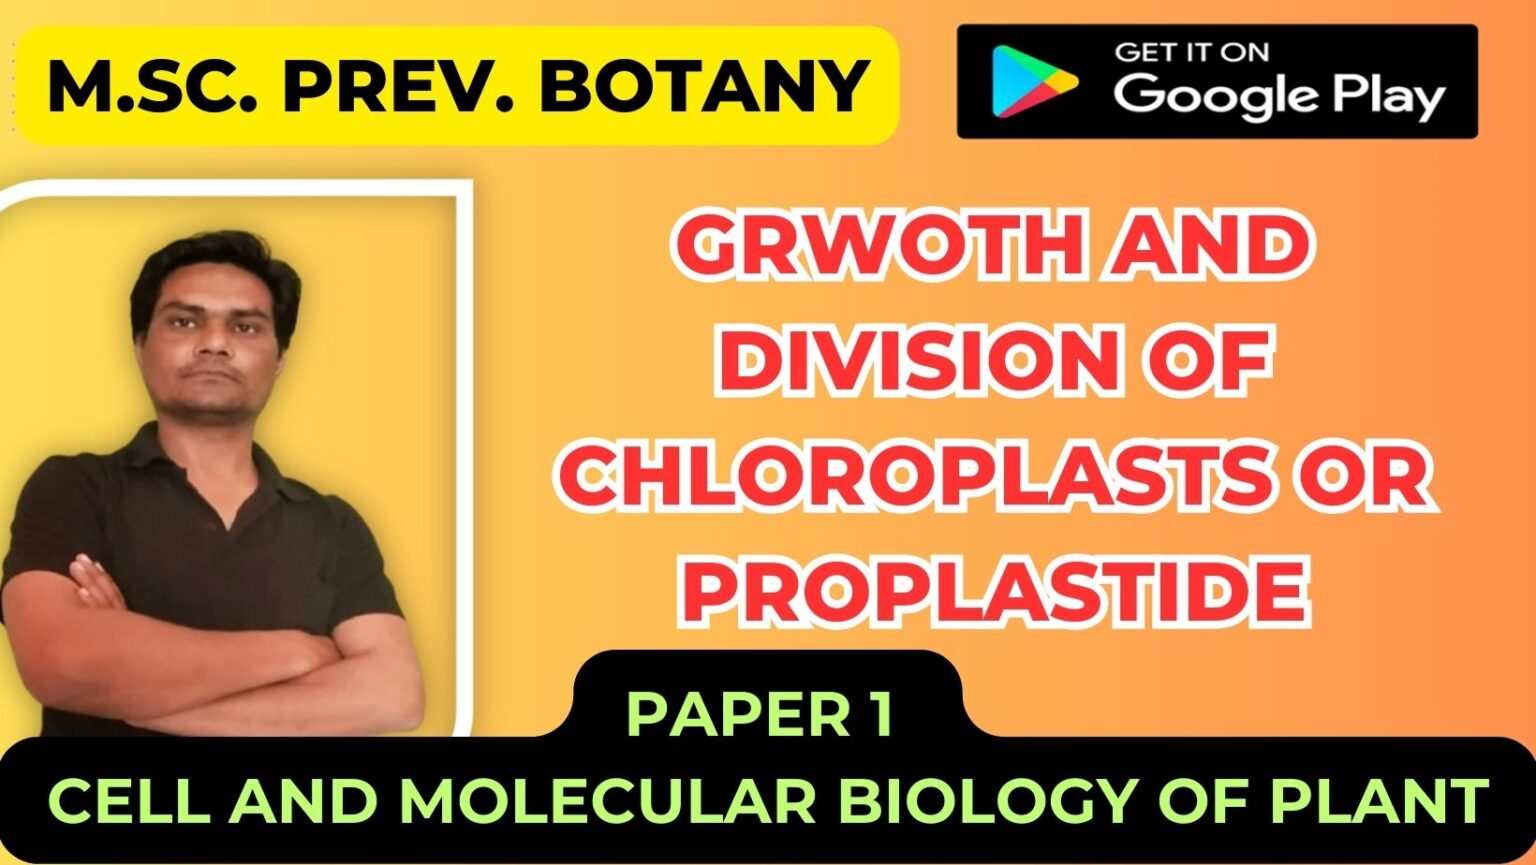 GRWOTH AND DIVISION OF CHLOROPLASTS OR PROPLASTIDE